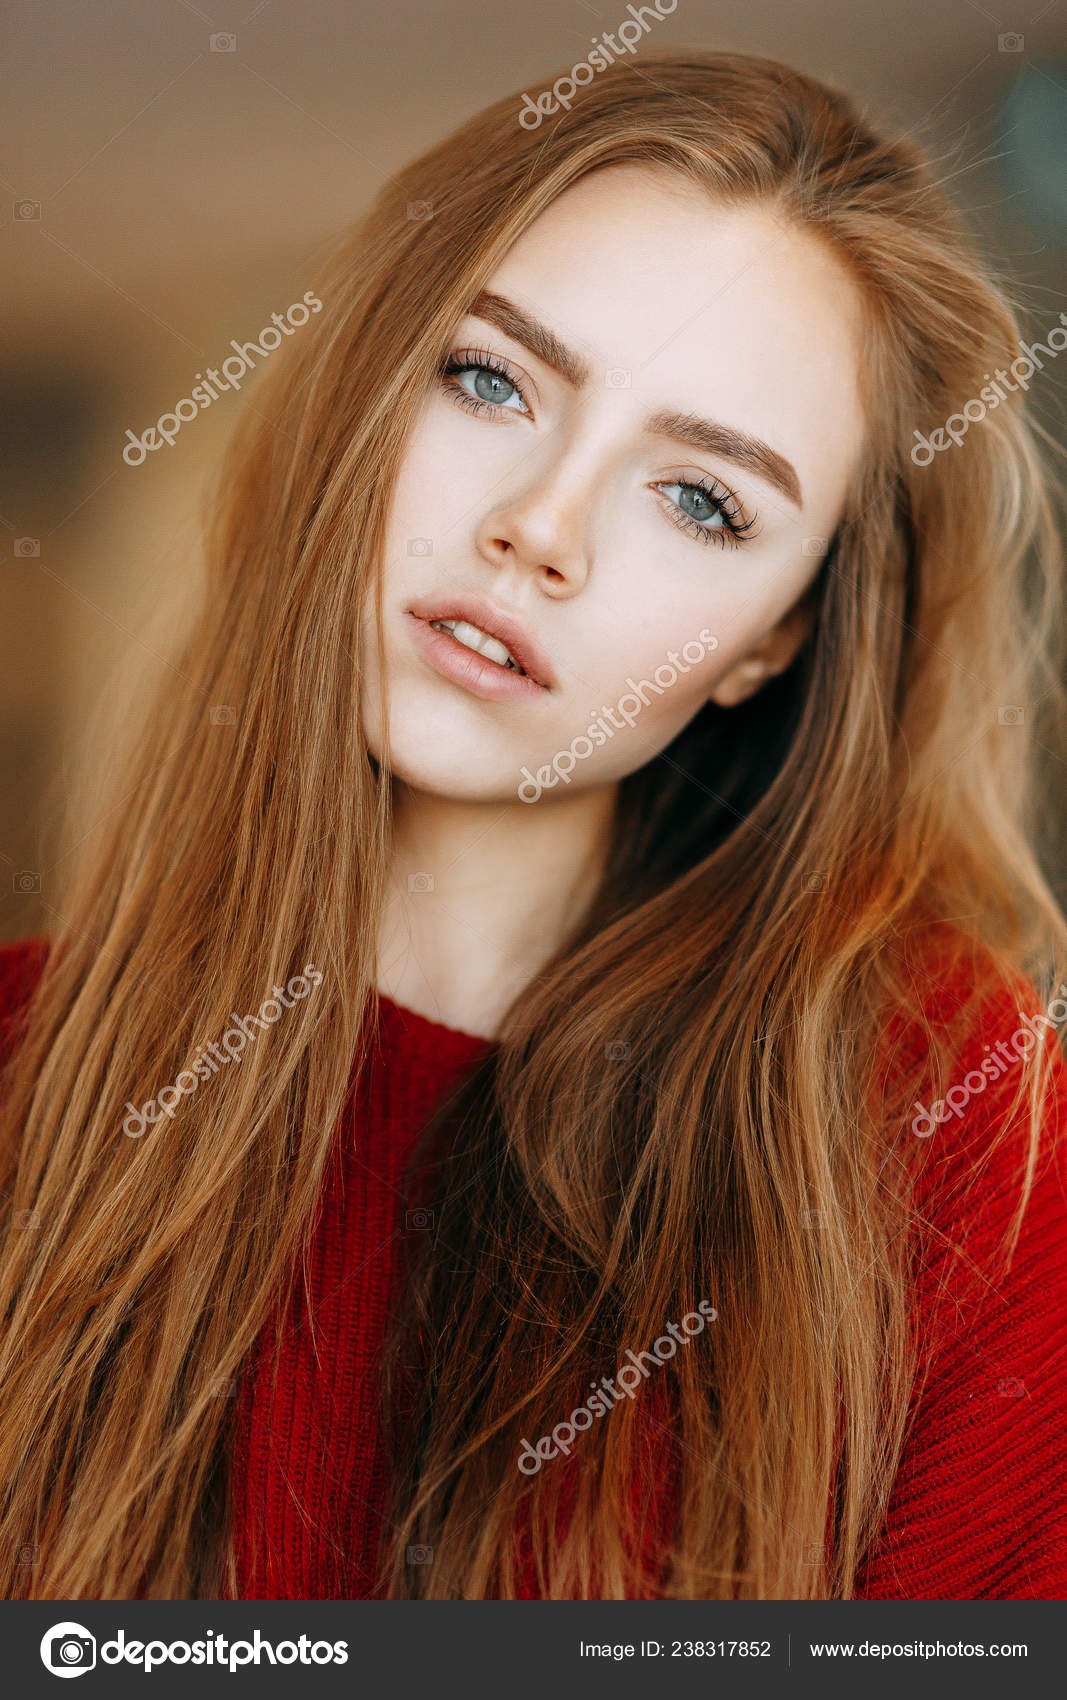 Beautiful Russian Girl Red Jacket Emotional Portraits Cute Face Stock Photo Image By C Pavelvozmischev